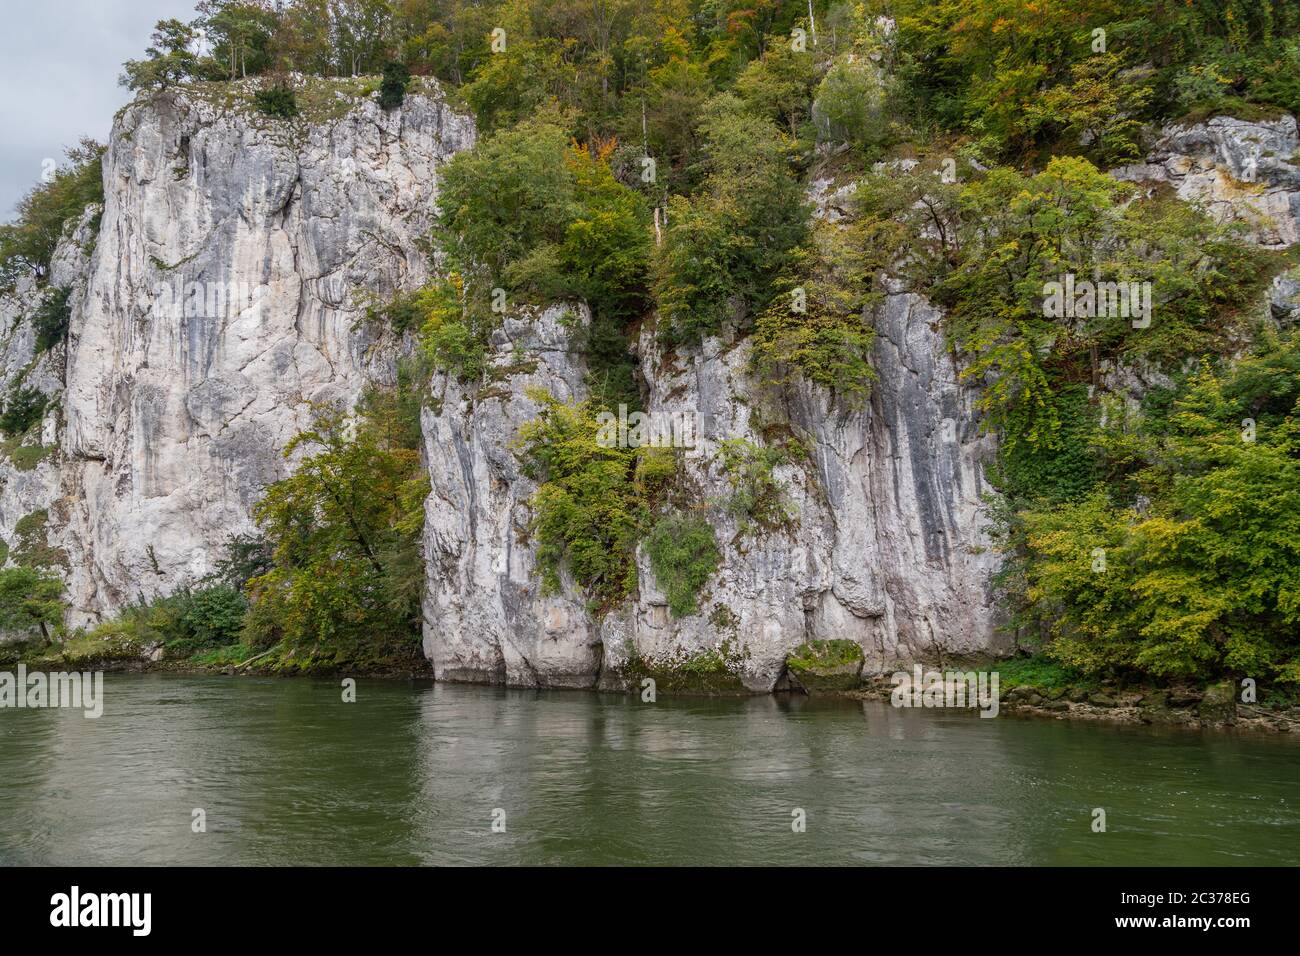 Danube river at Danube breakthrough near Kelheim, Bavaria, Germany in autumn with limestone rock formations and plants with colorful leaves Stock Photo